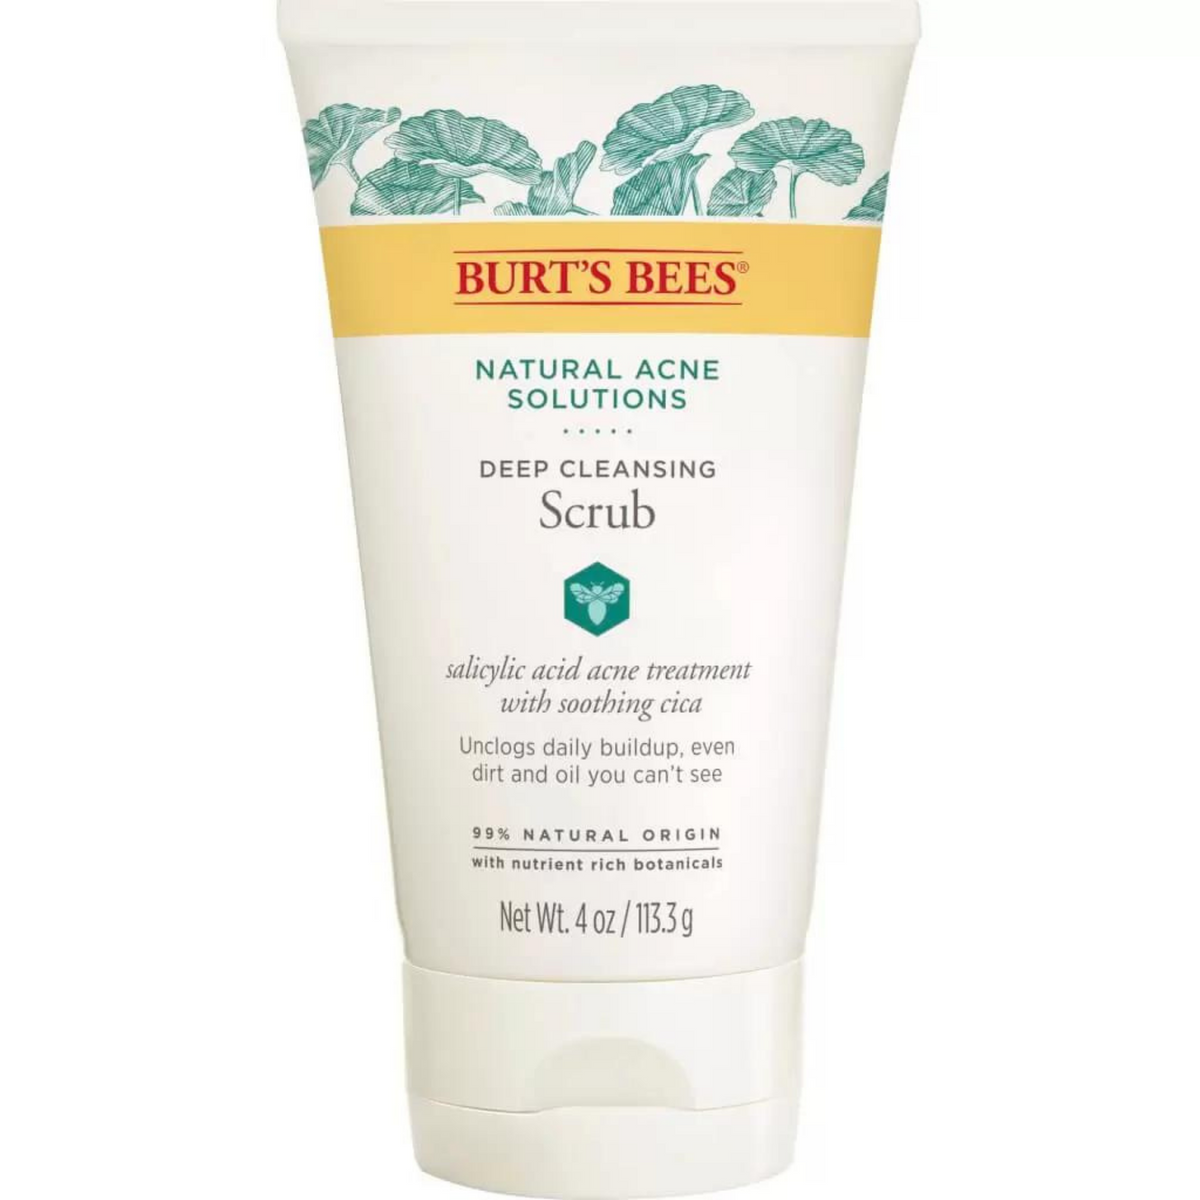 Primary image of Natural Acne Solutions Pore Refining Scrub